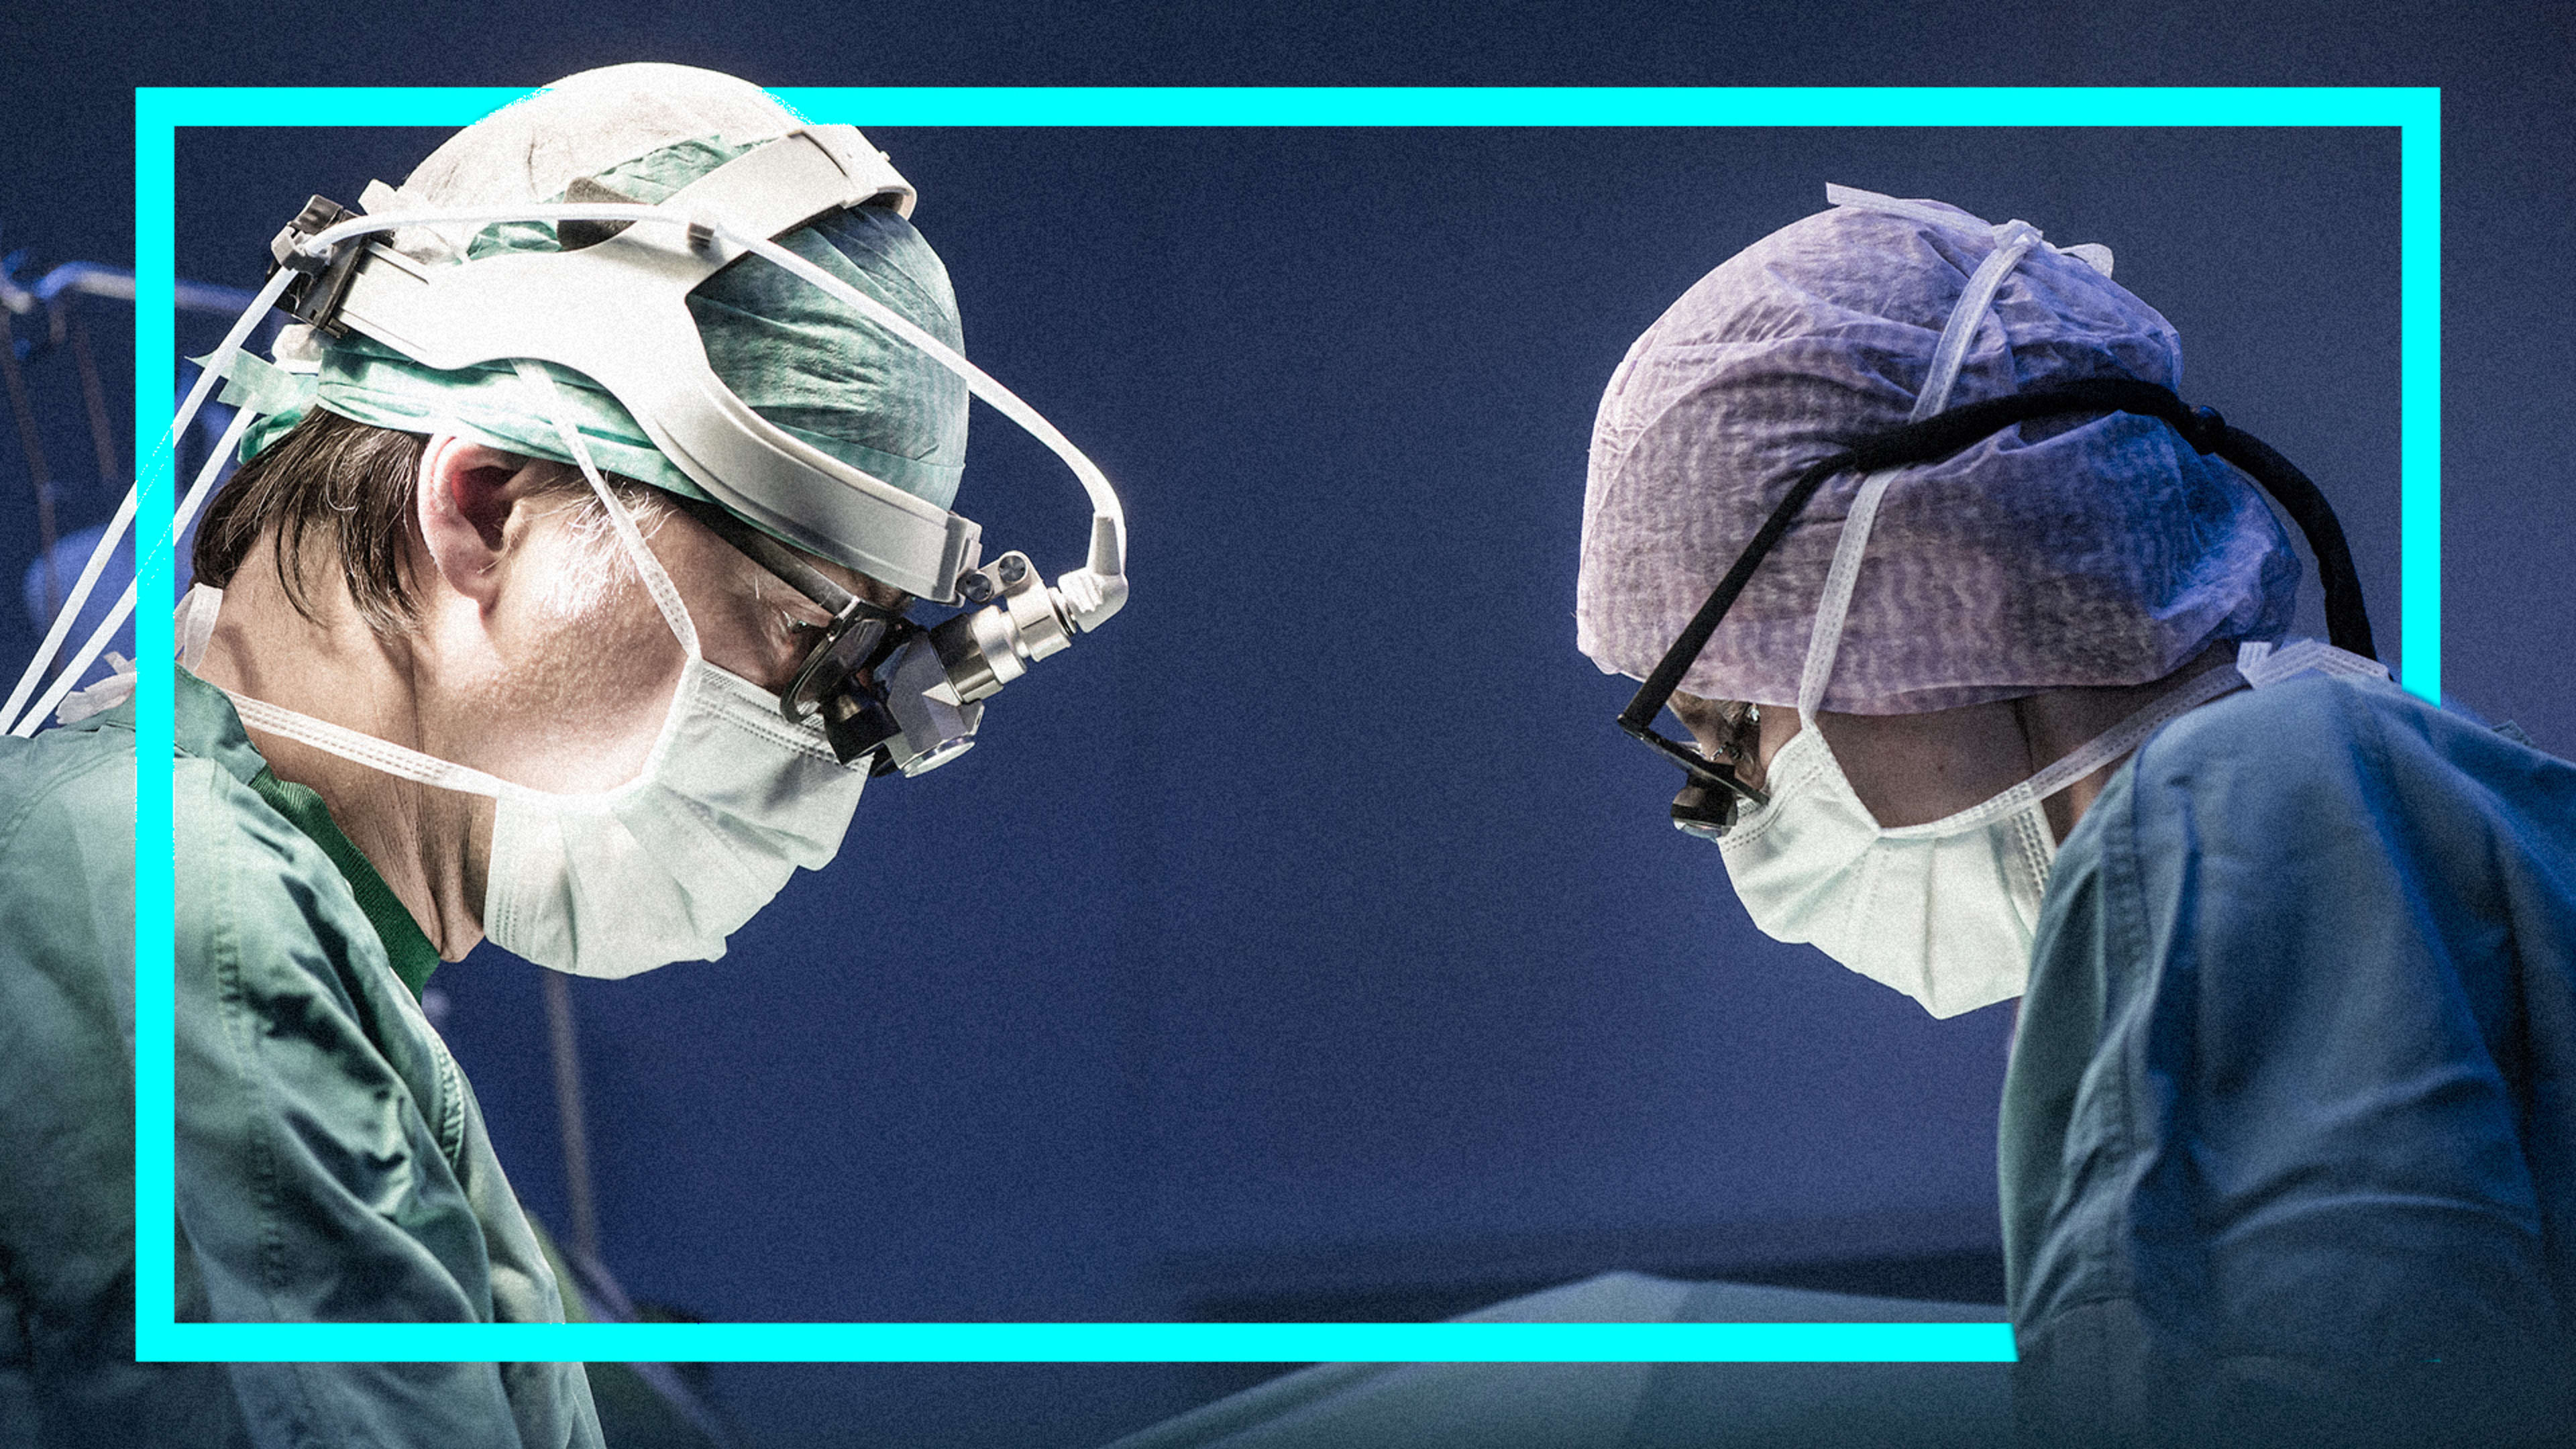 How telemedicine in the operating room will transform surgery